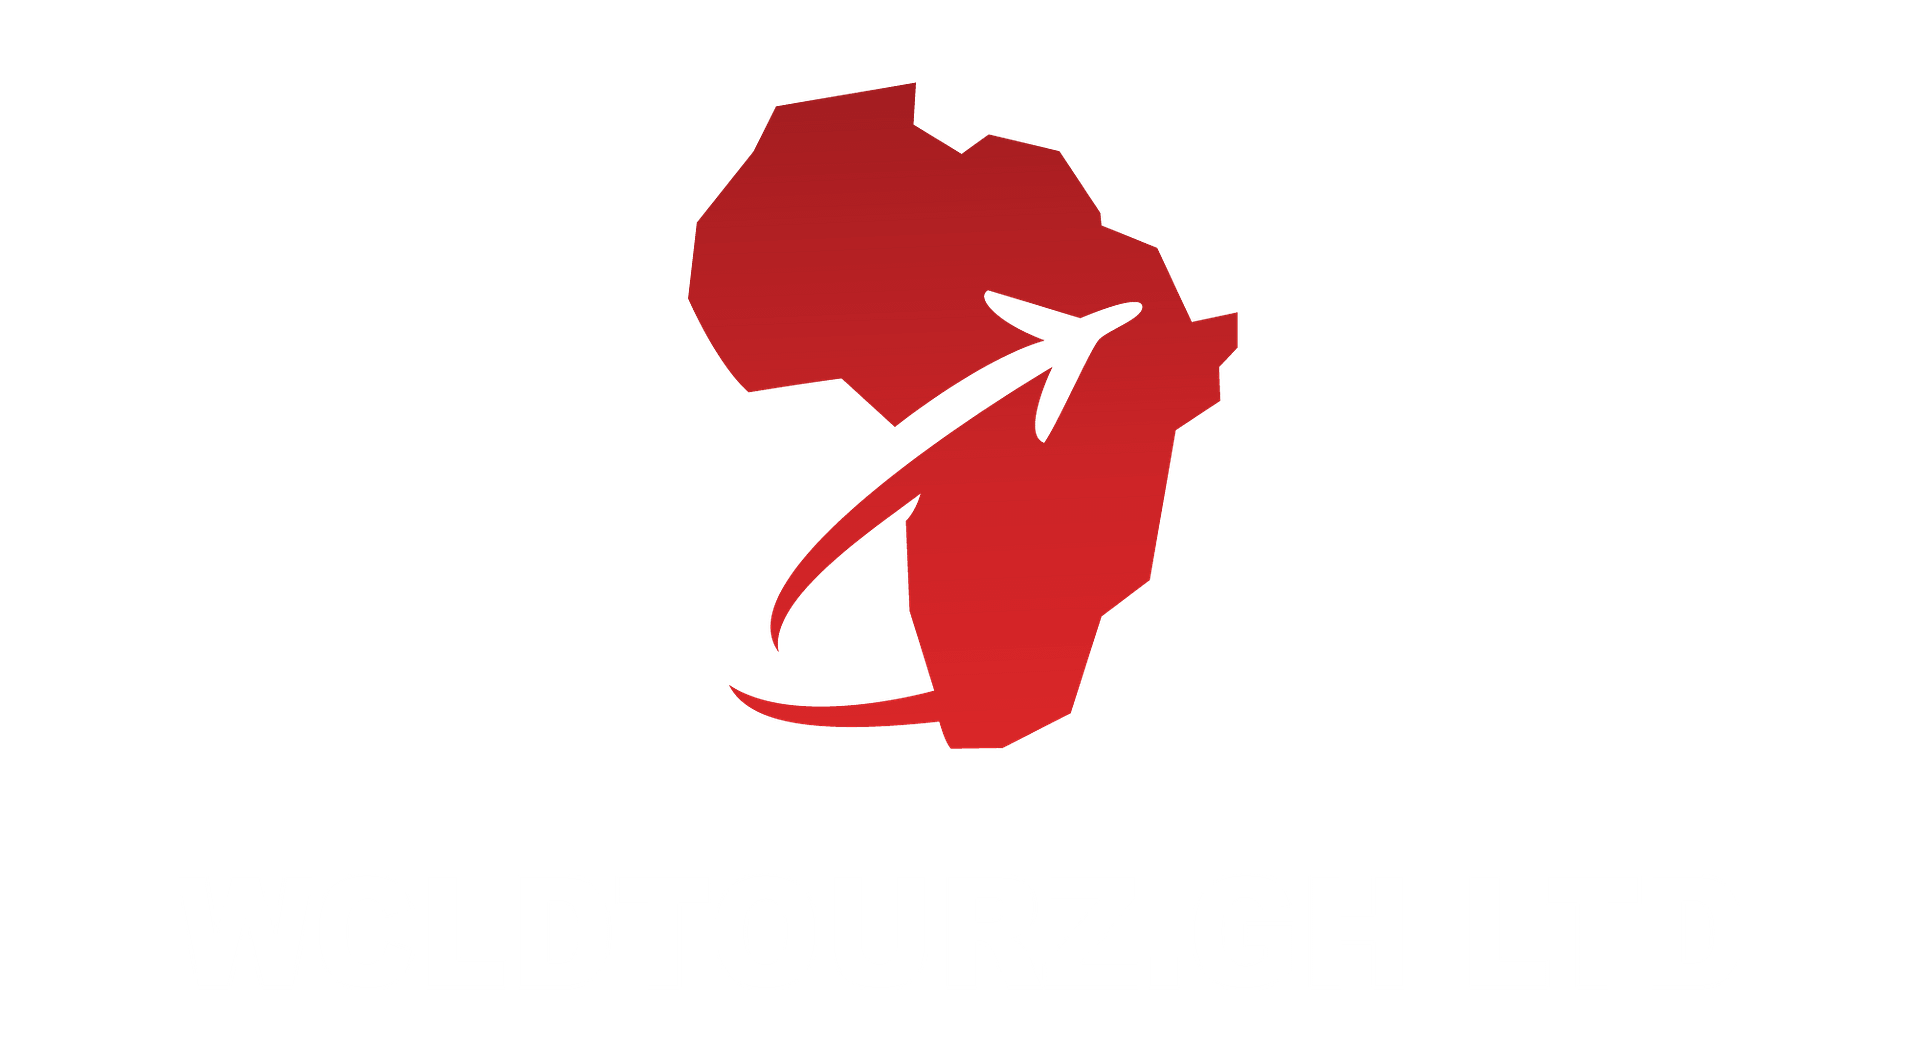 Wlcdtourz.GH Travel and Tours Ghana | Explore Ghana's wonders with Wcldtourz.Gh Ltd. Book authentic adventures, discover cultural treasures, and embark on unforgettable journeys. Your gateway to Gha